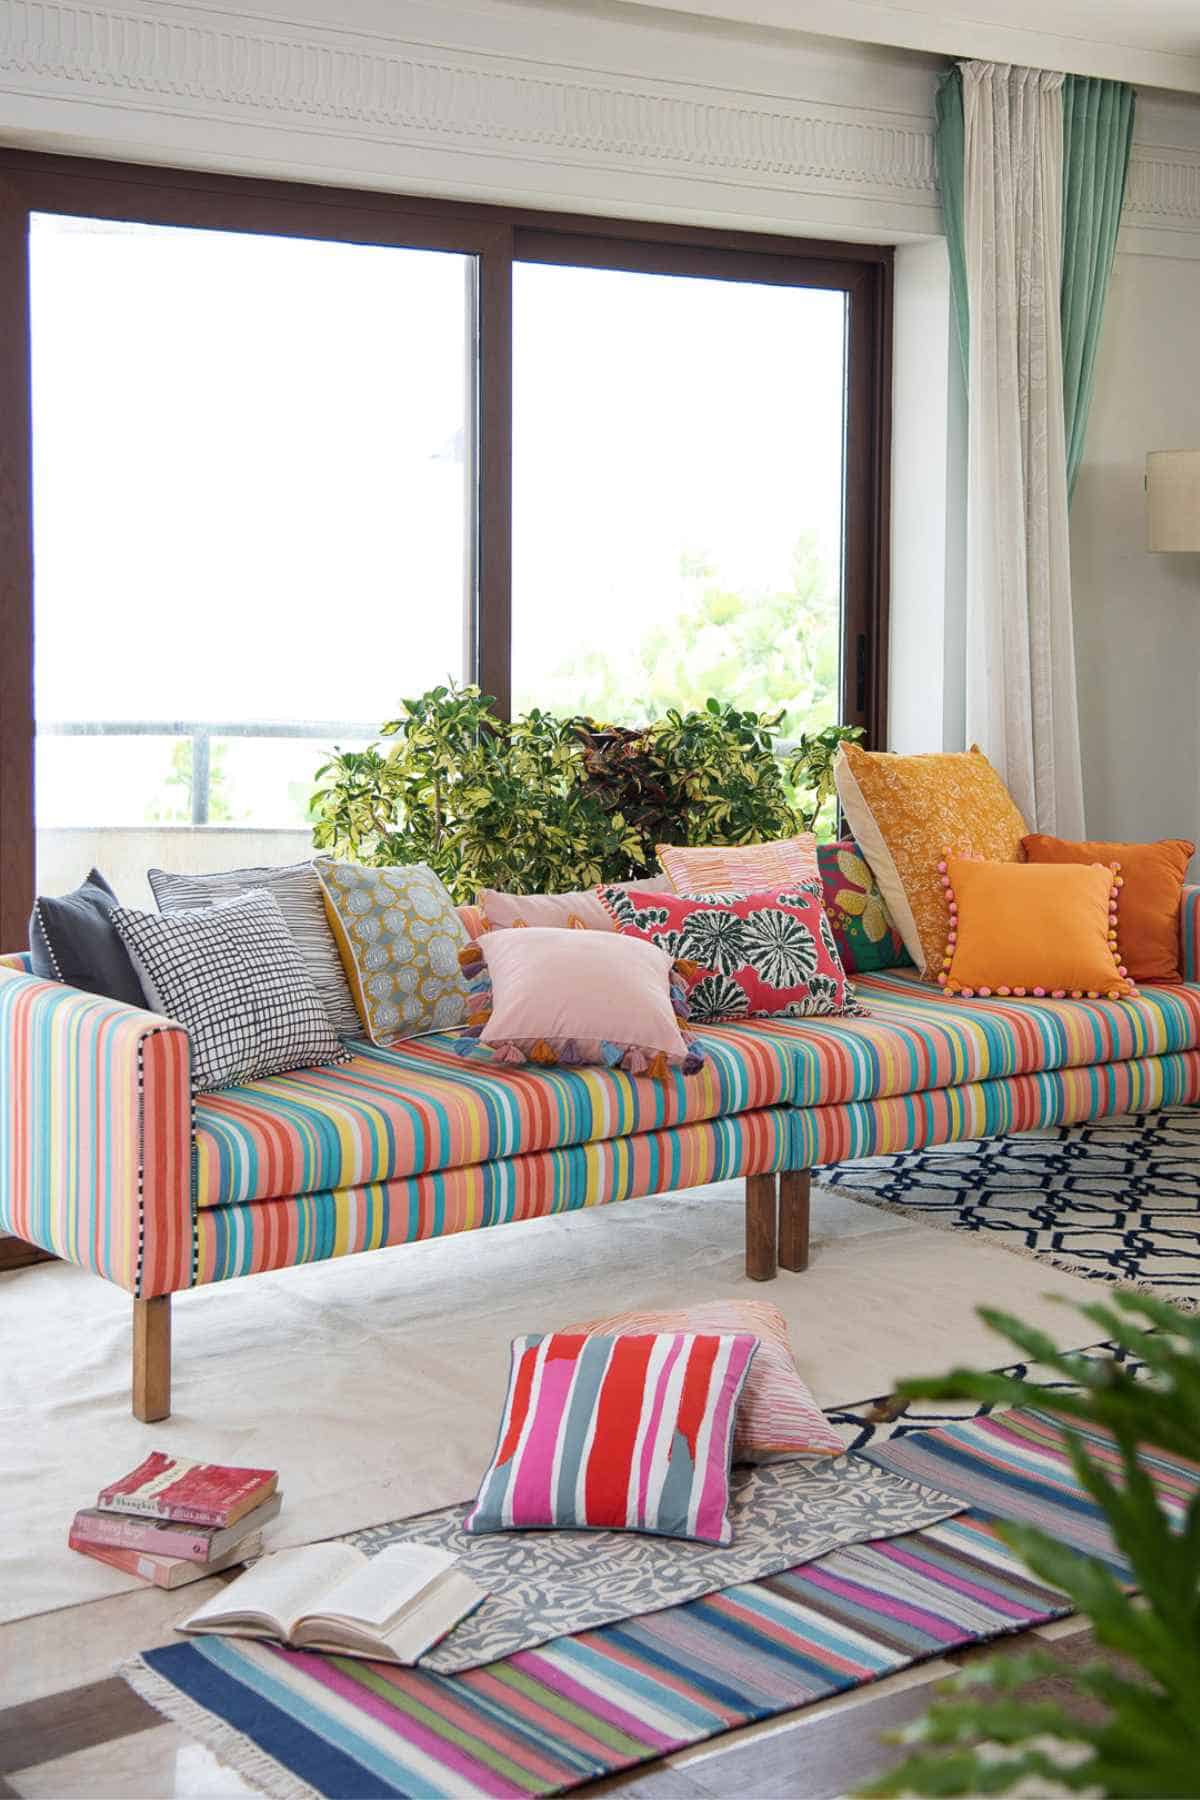 multicolored sofa in a living room with rugs and a window view